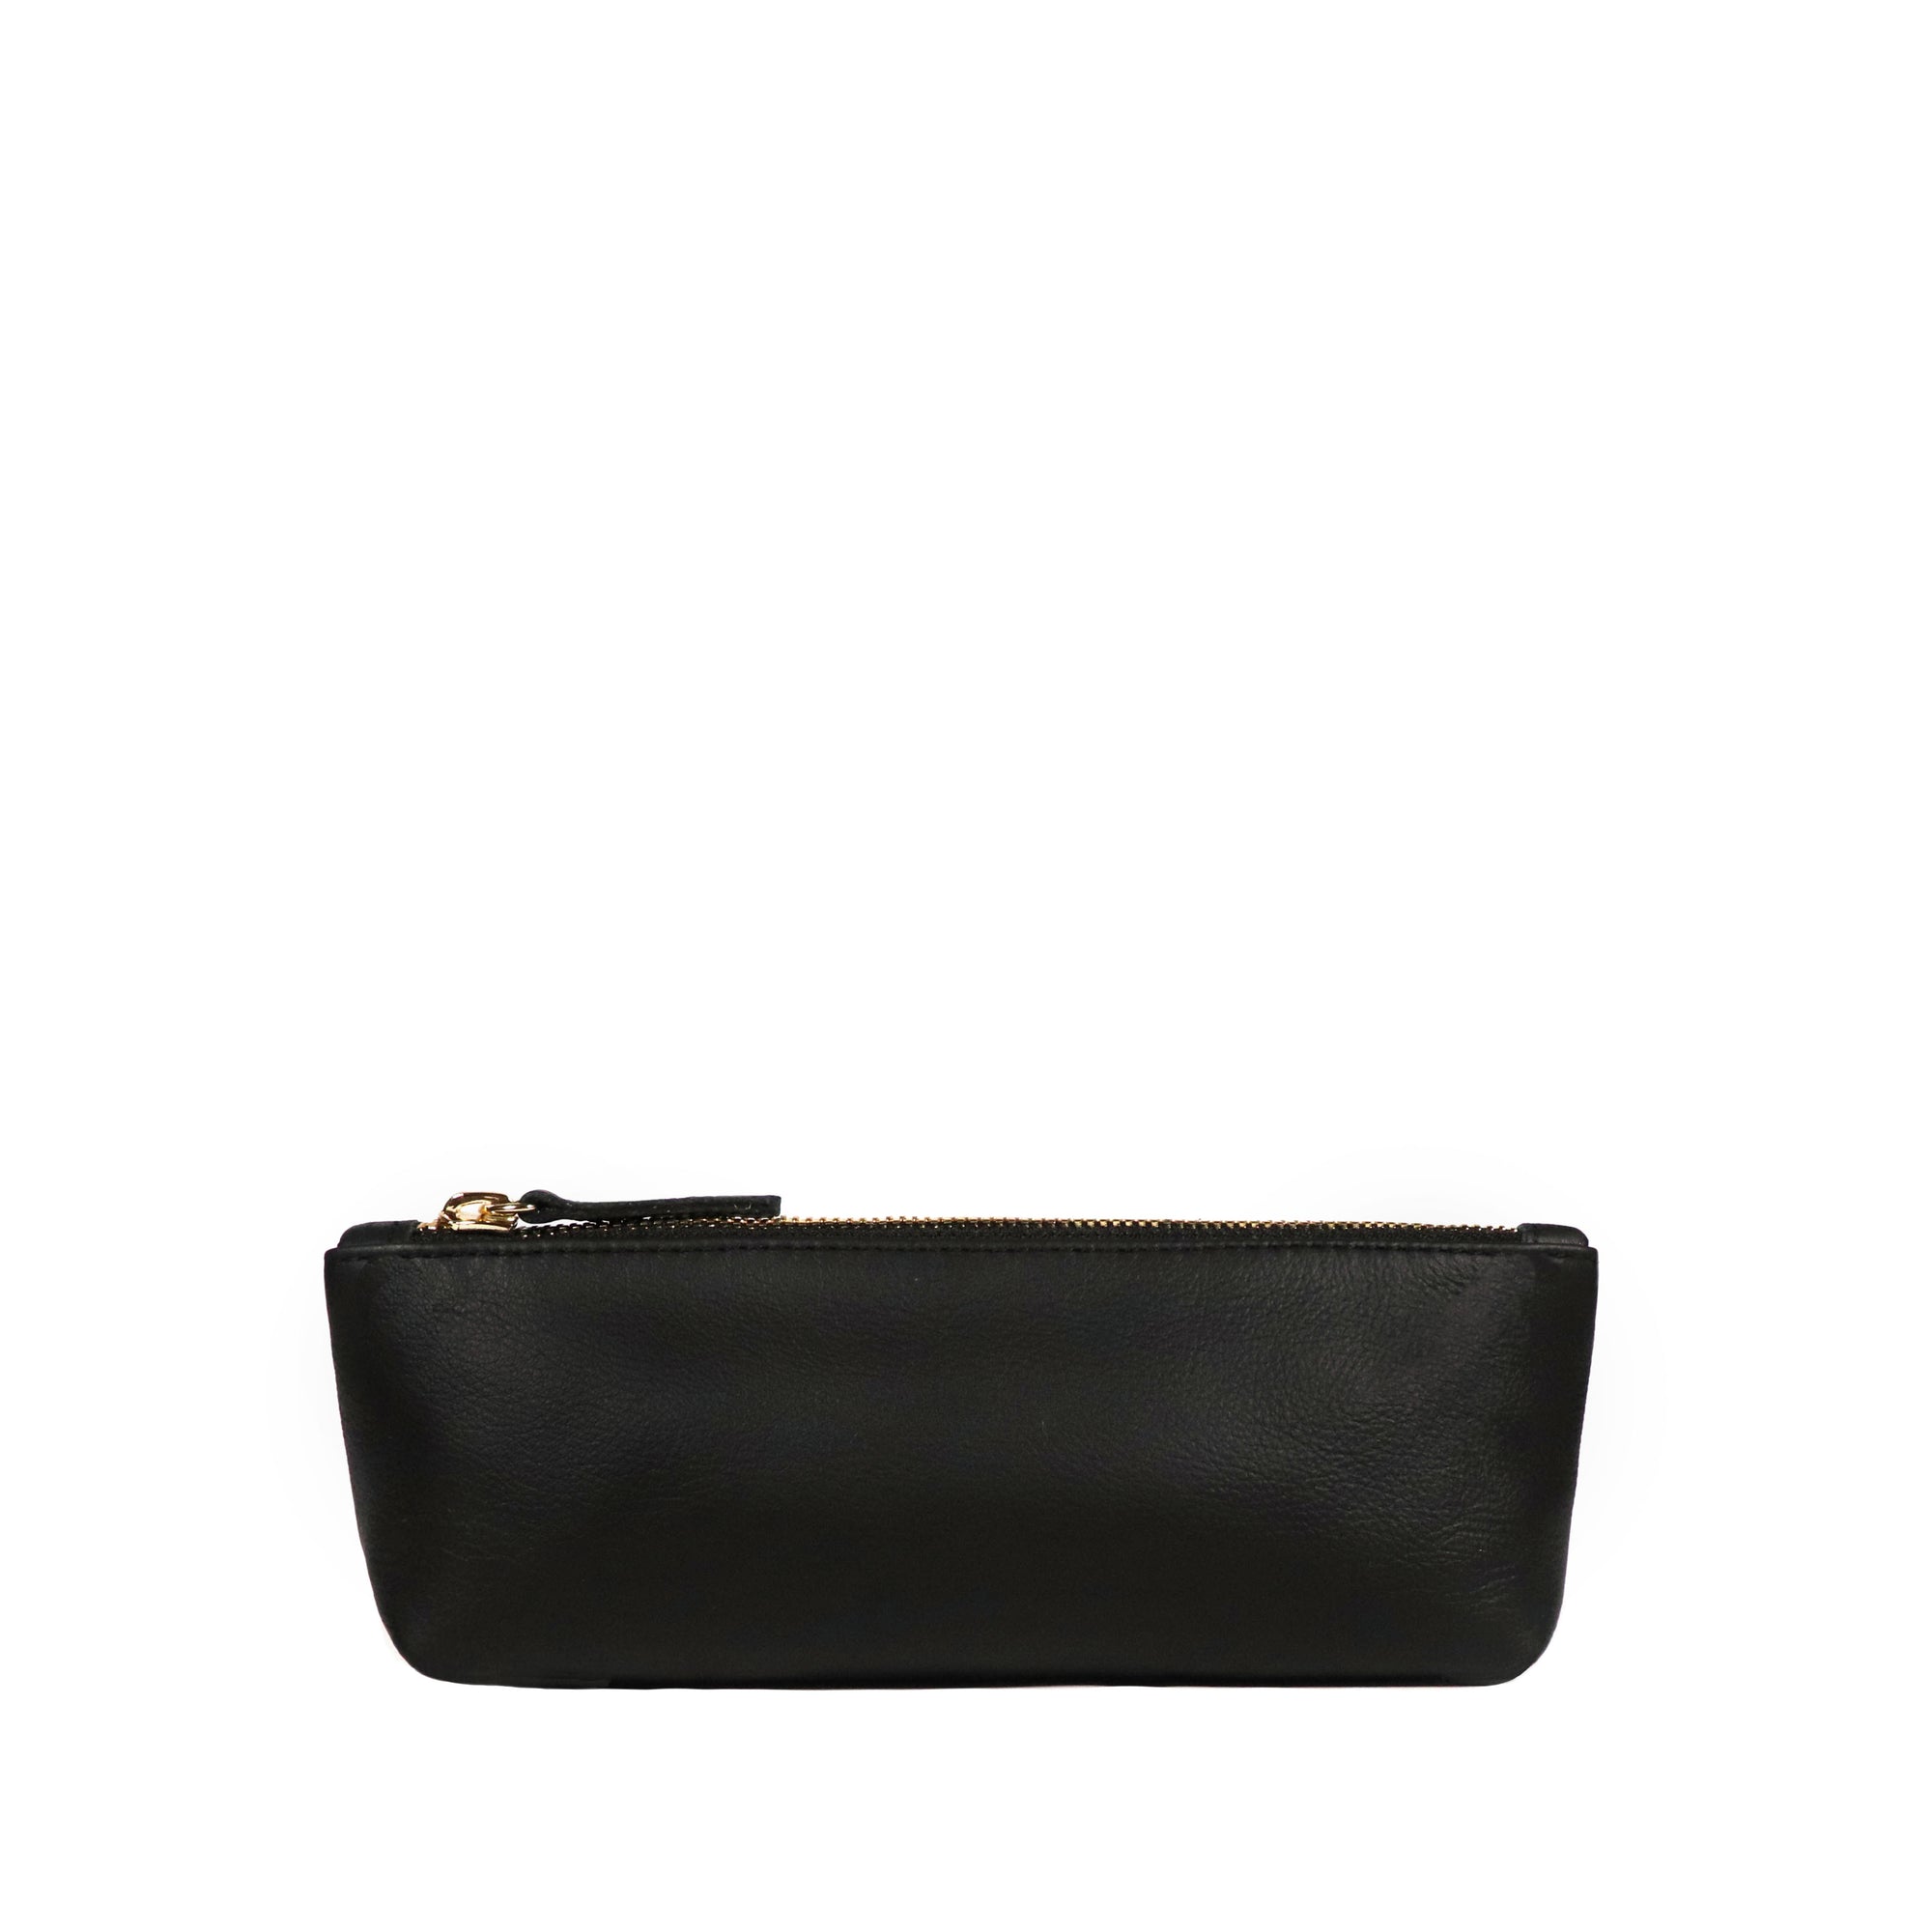 Pismo Pouch - leather zipper pouch in black leather.  Made in U.S.A. by Jana Kay. 